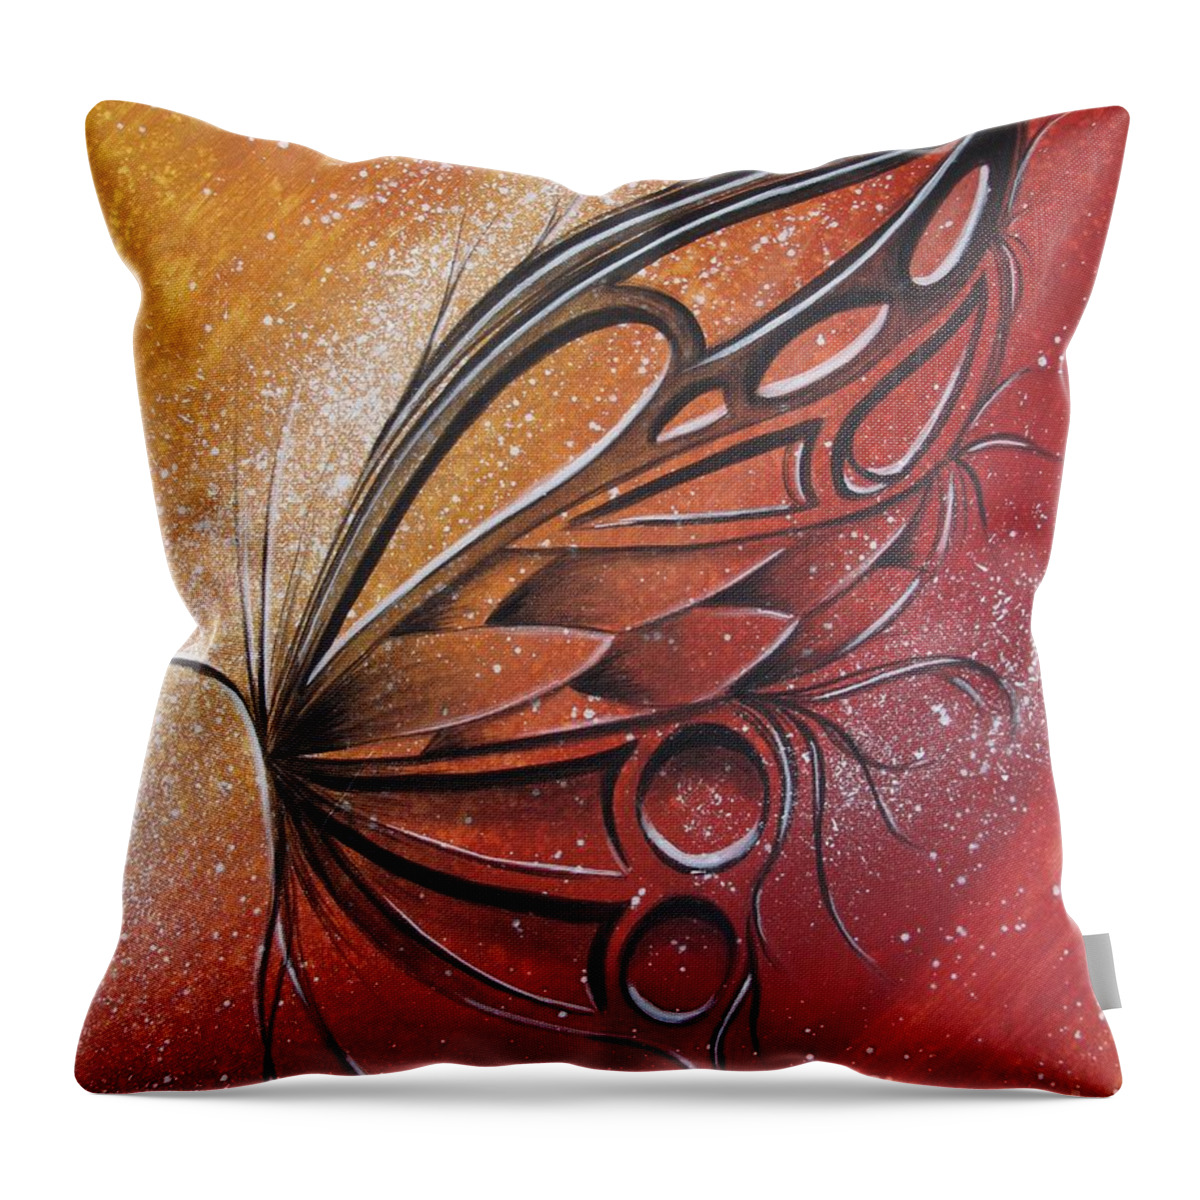 Reina Throw Pillow featuring the painting Butterfly 6 by Reina Cottier